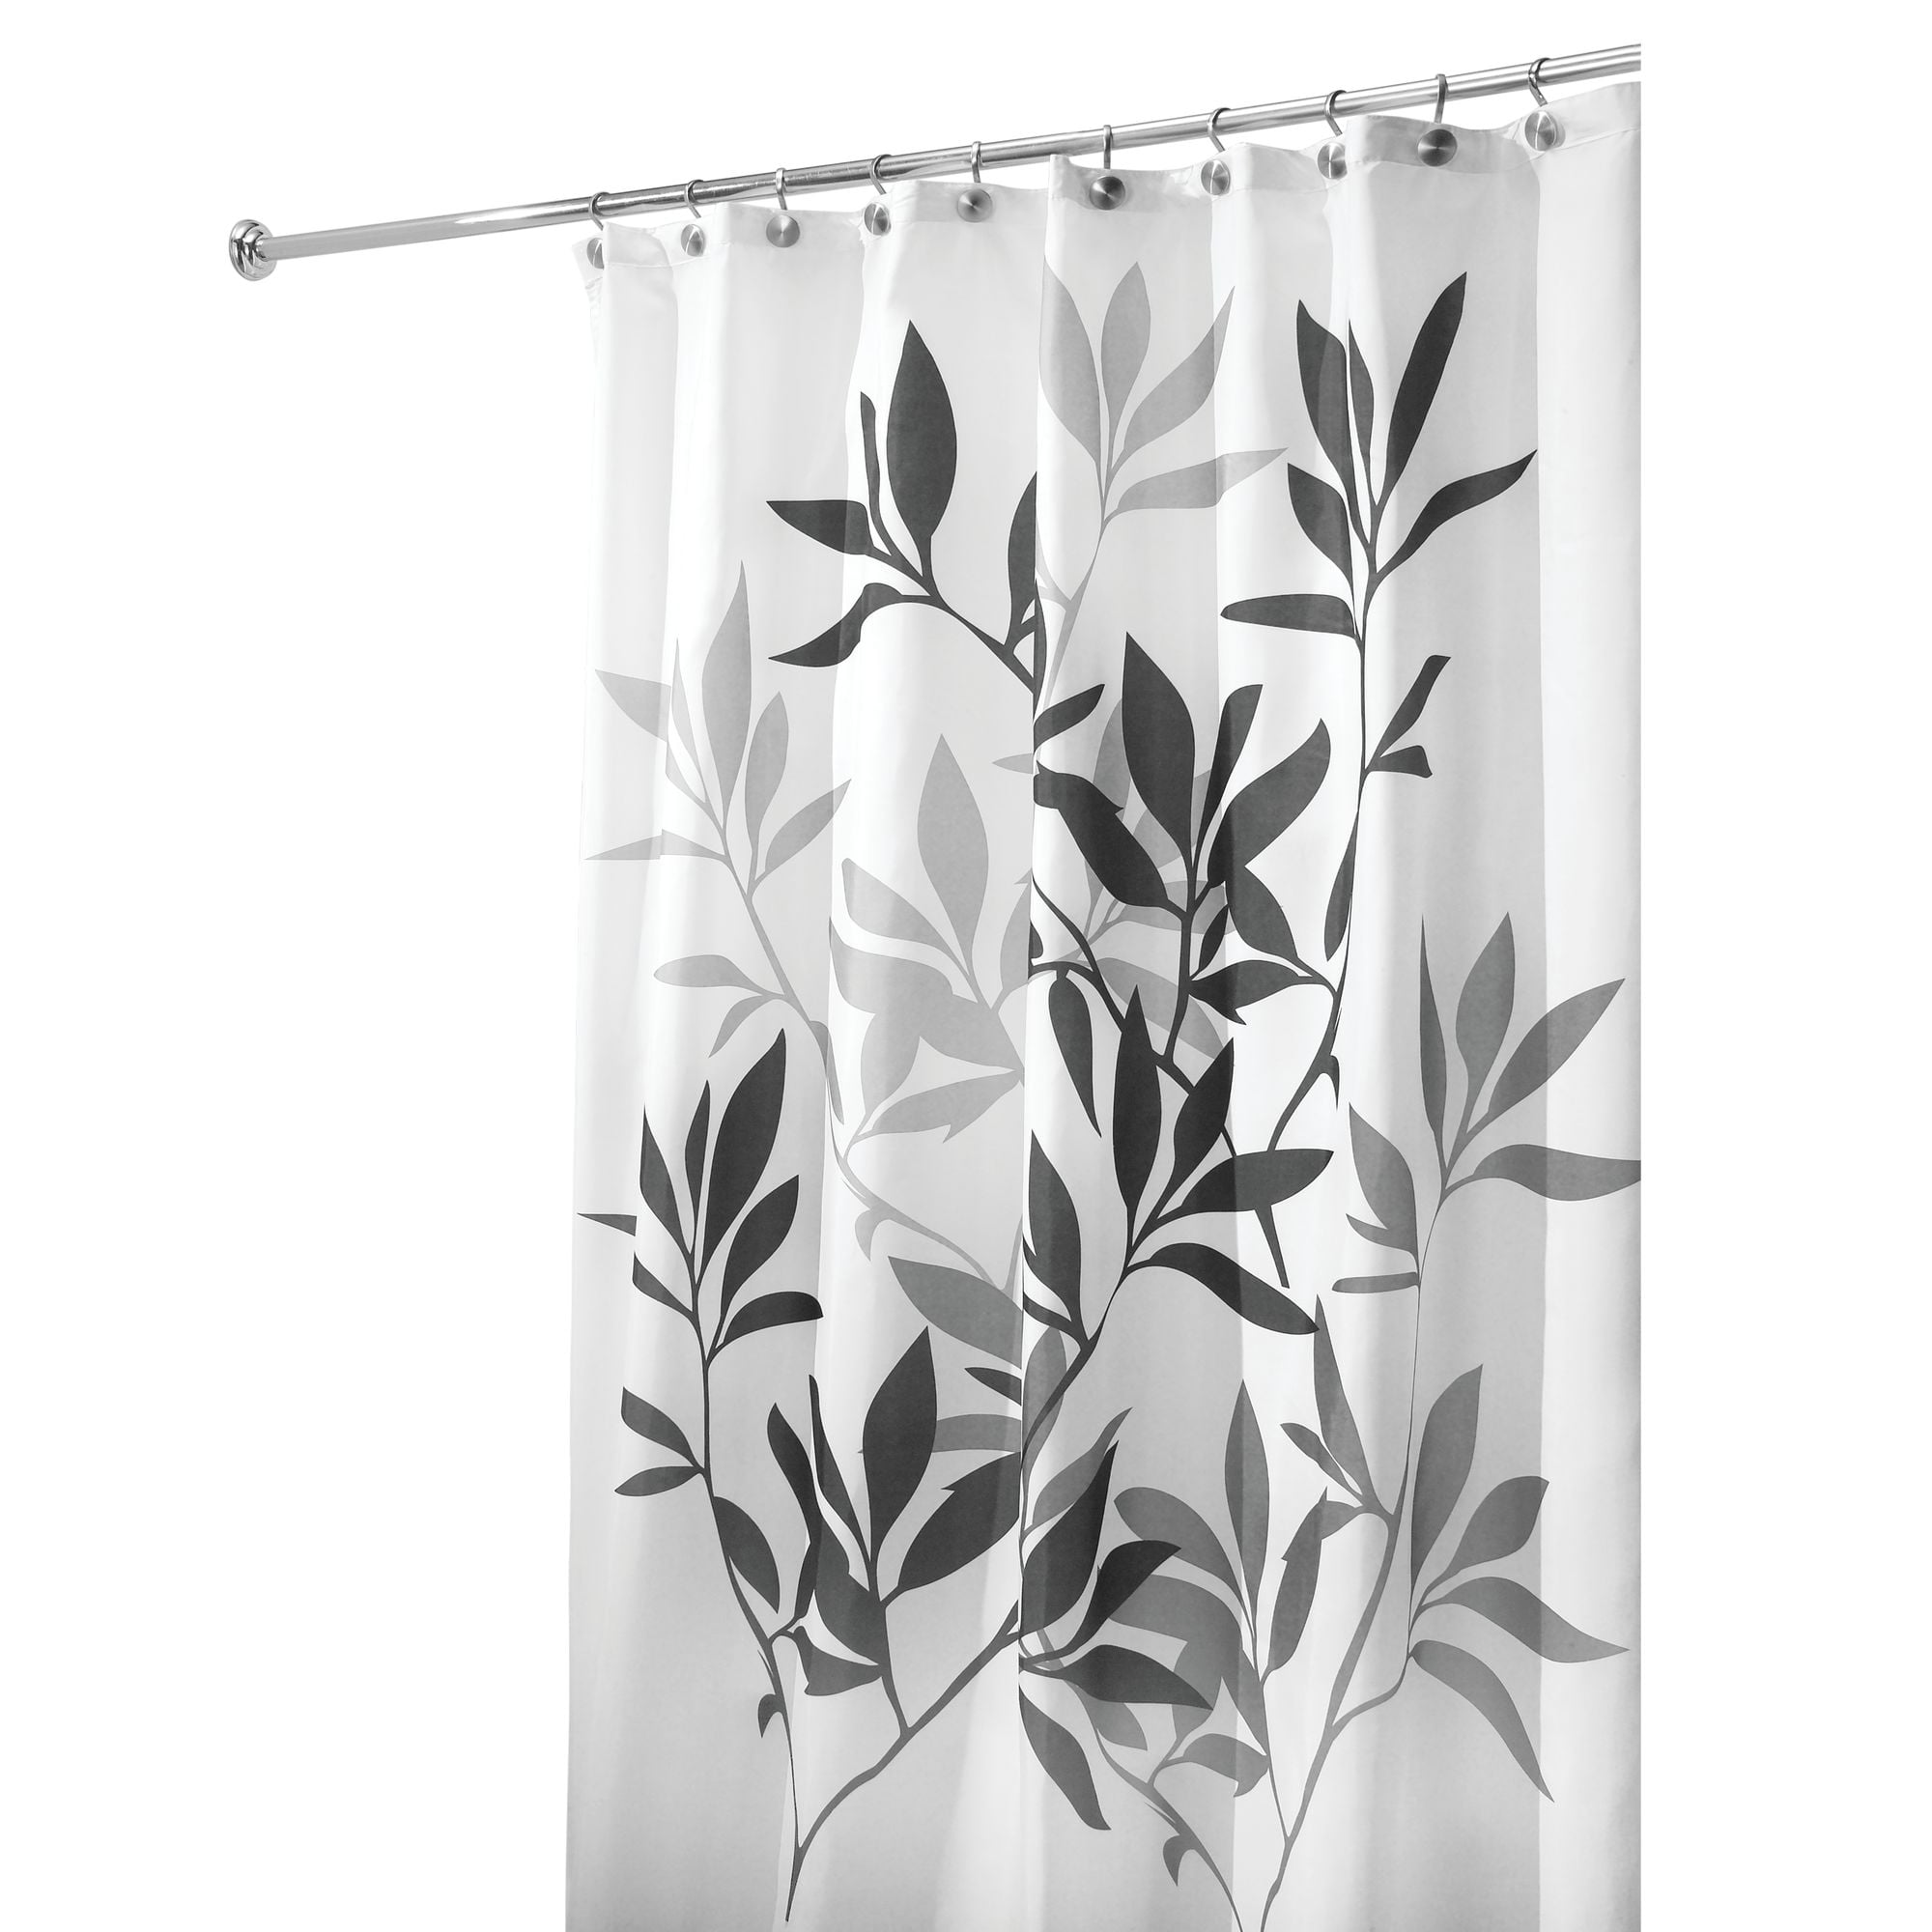 Buy Emvency Shower Curtains 78 x 72 Inches Louis Luxury Geometric